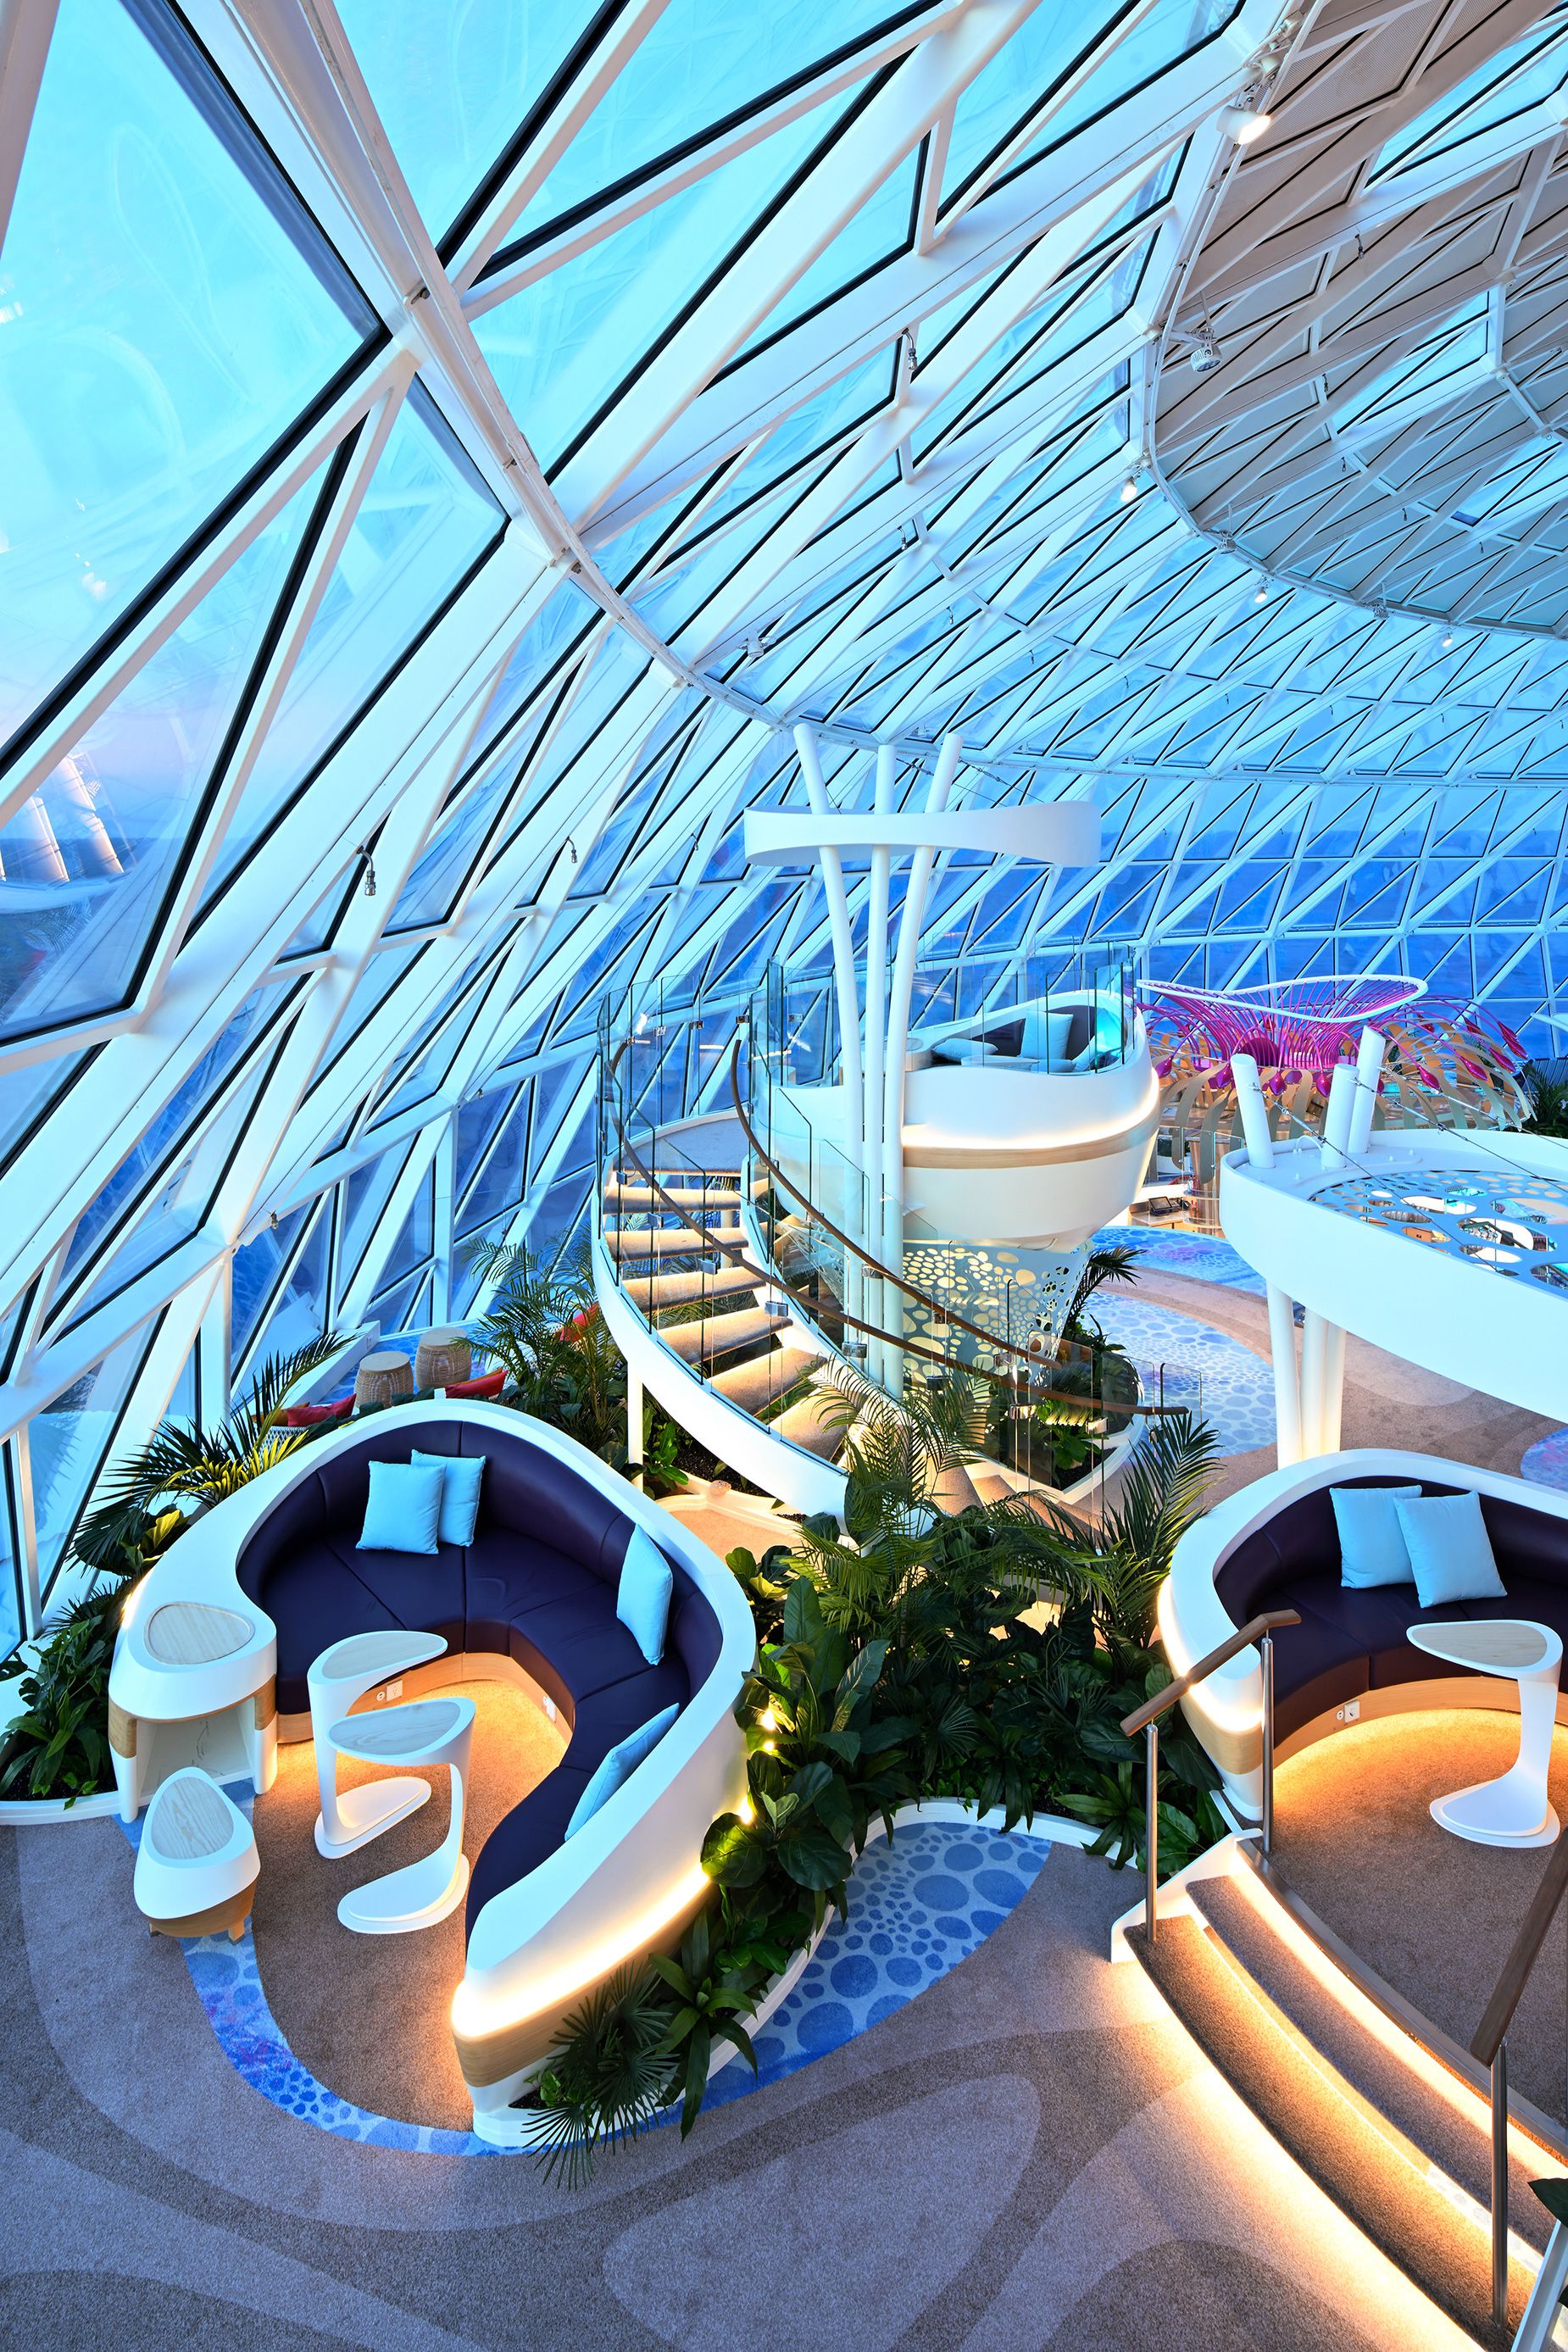 The Overlook Lounge, located inside the 82-foot-tall steel and glass AquaDome that crowns part of the top of the ship, has elevated seating pods.